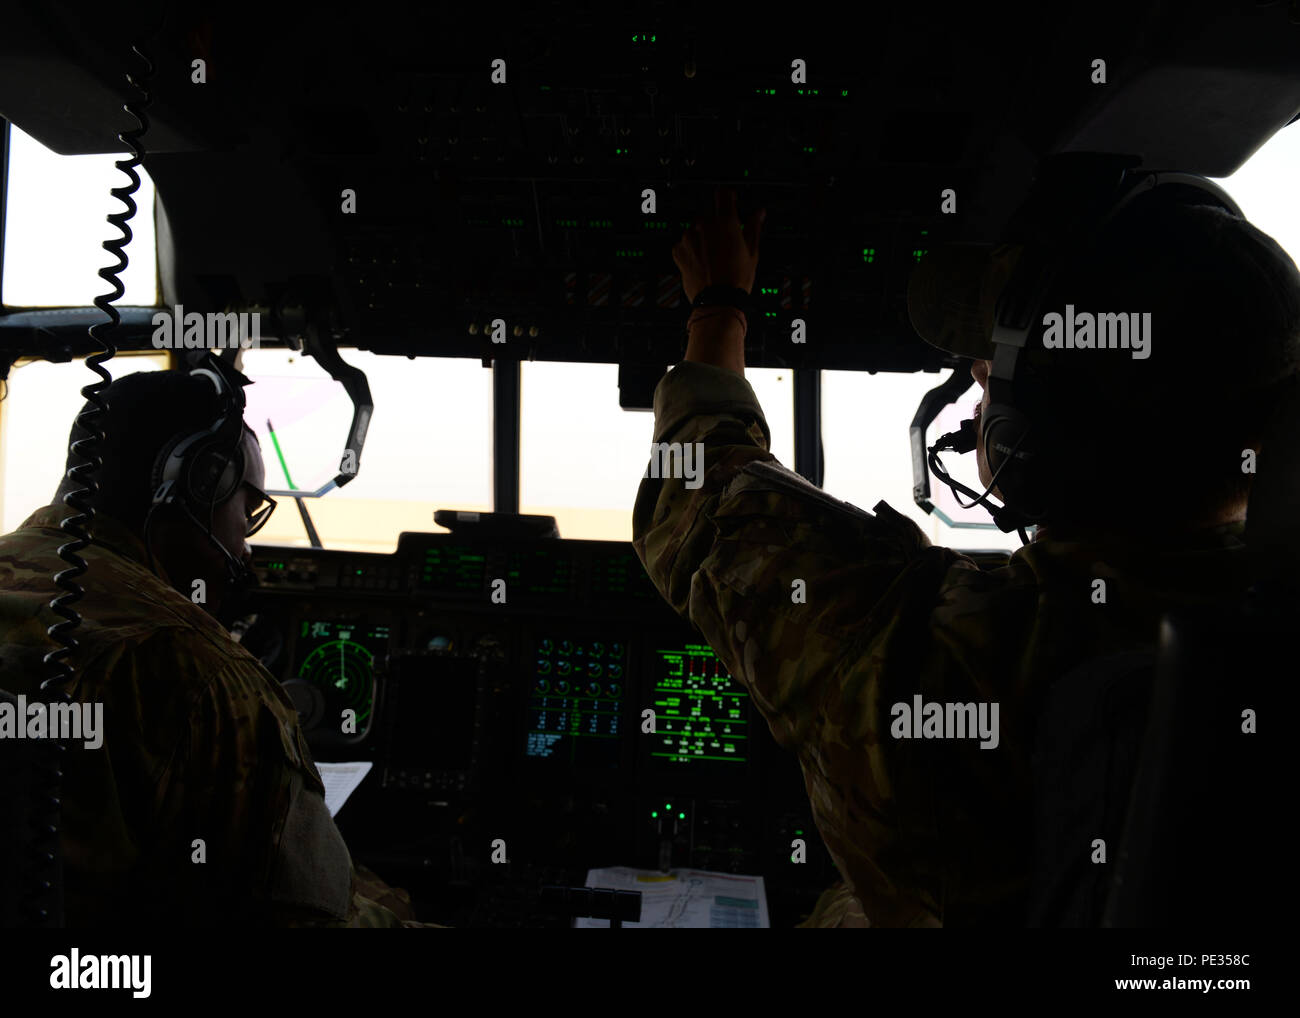 U.S. Air Force Capts. Boston McClain and Matt Buchholtz, 774th Expeditionary Airlift Squadron C-130J Super Hercules pilots, power on their aircraft in preparation for take-off from Al Udeid Air Base, Qatar, Sept. 3, 2015. The pilots, who are deployed from Little Rock Air Force Base, Ark., fly various combat missions throughout Afghanistan supporting missions ranging from medical evacuations to cargo and passenger transports. (U.S. Air Force photo by Senior Airman Cierra Presentado/Released) Stock Photo